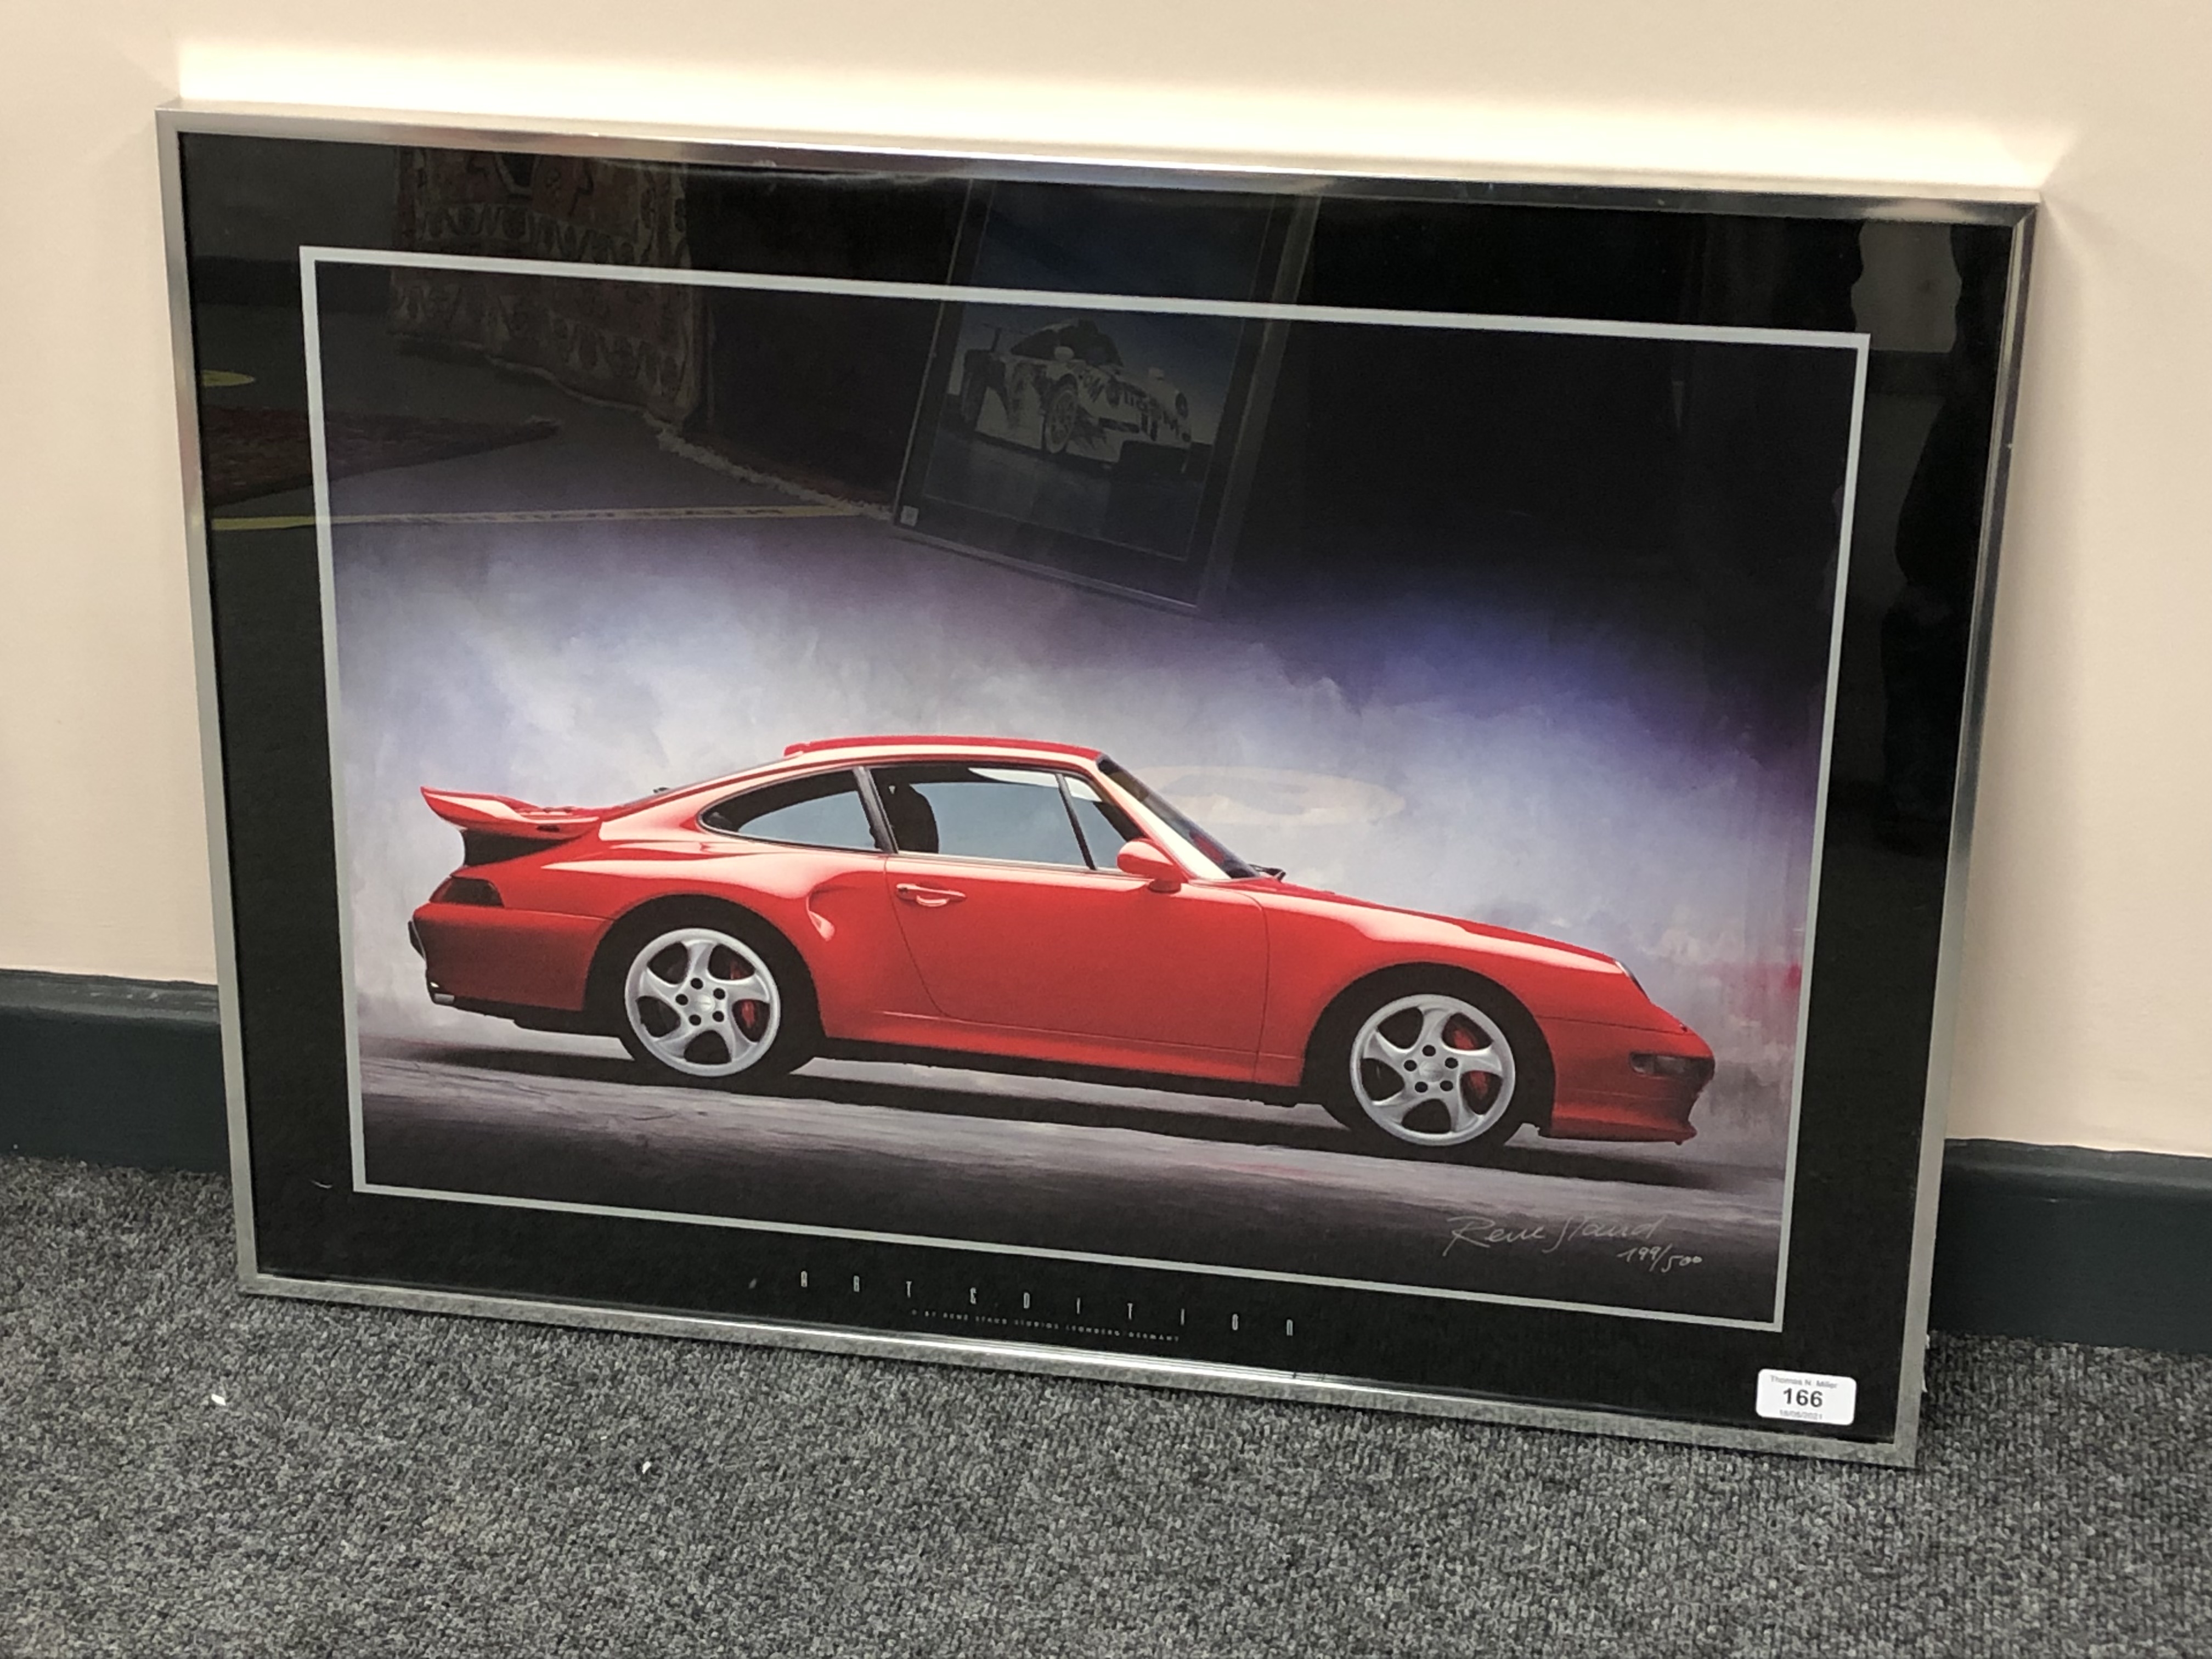 After René Staud, A limited edition Porsche print, signed and numbered 199/500,